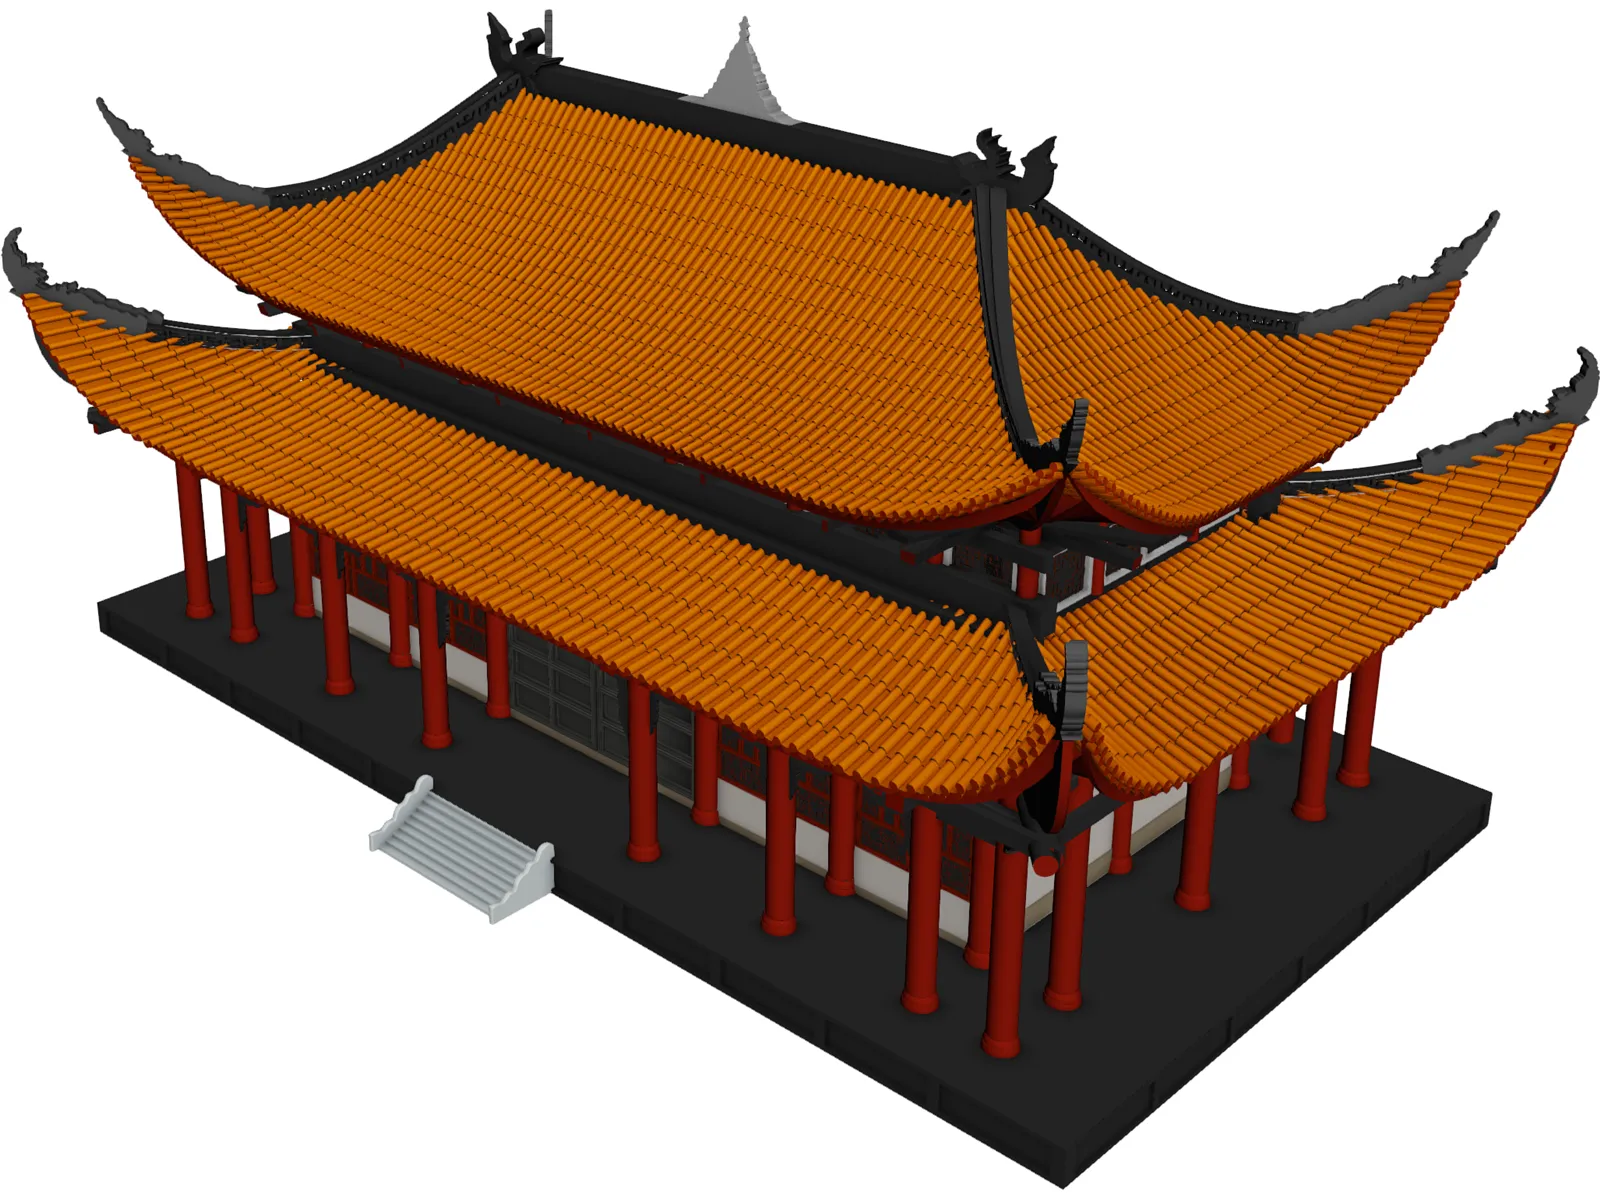 Attic Chinese Building 3D Model